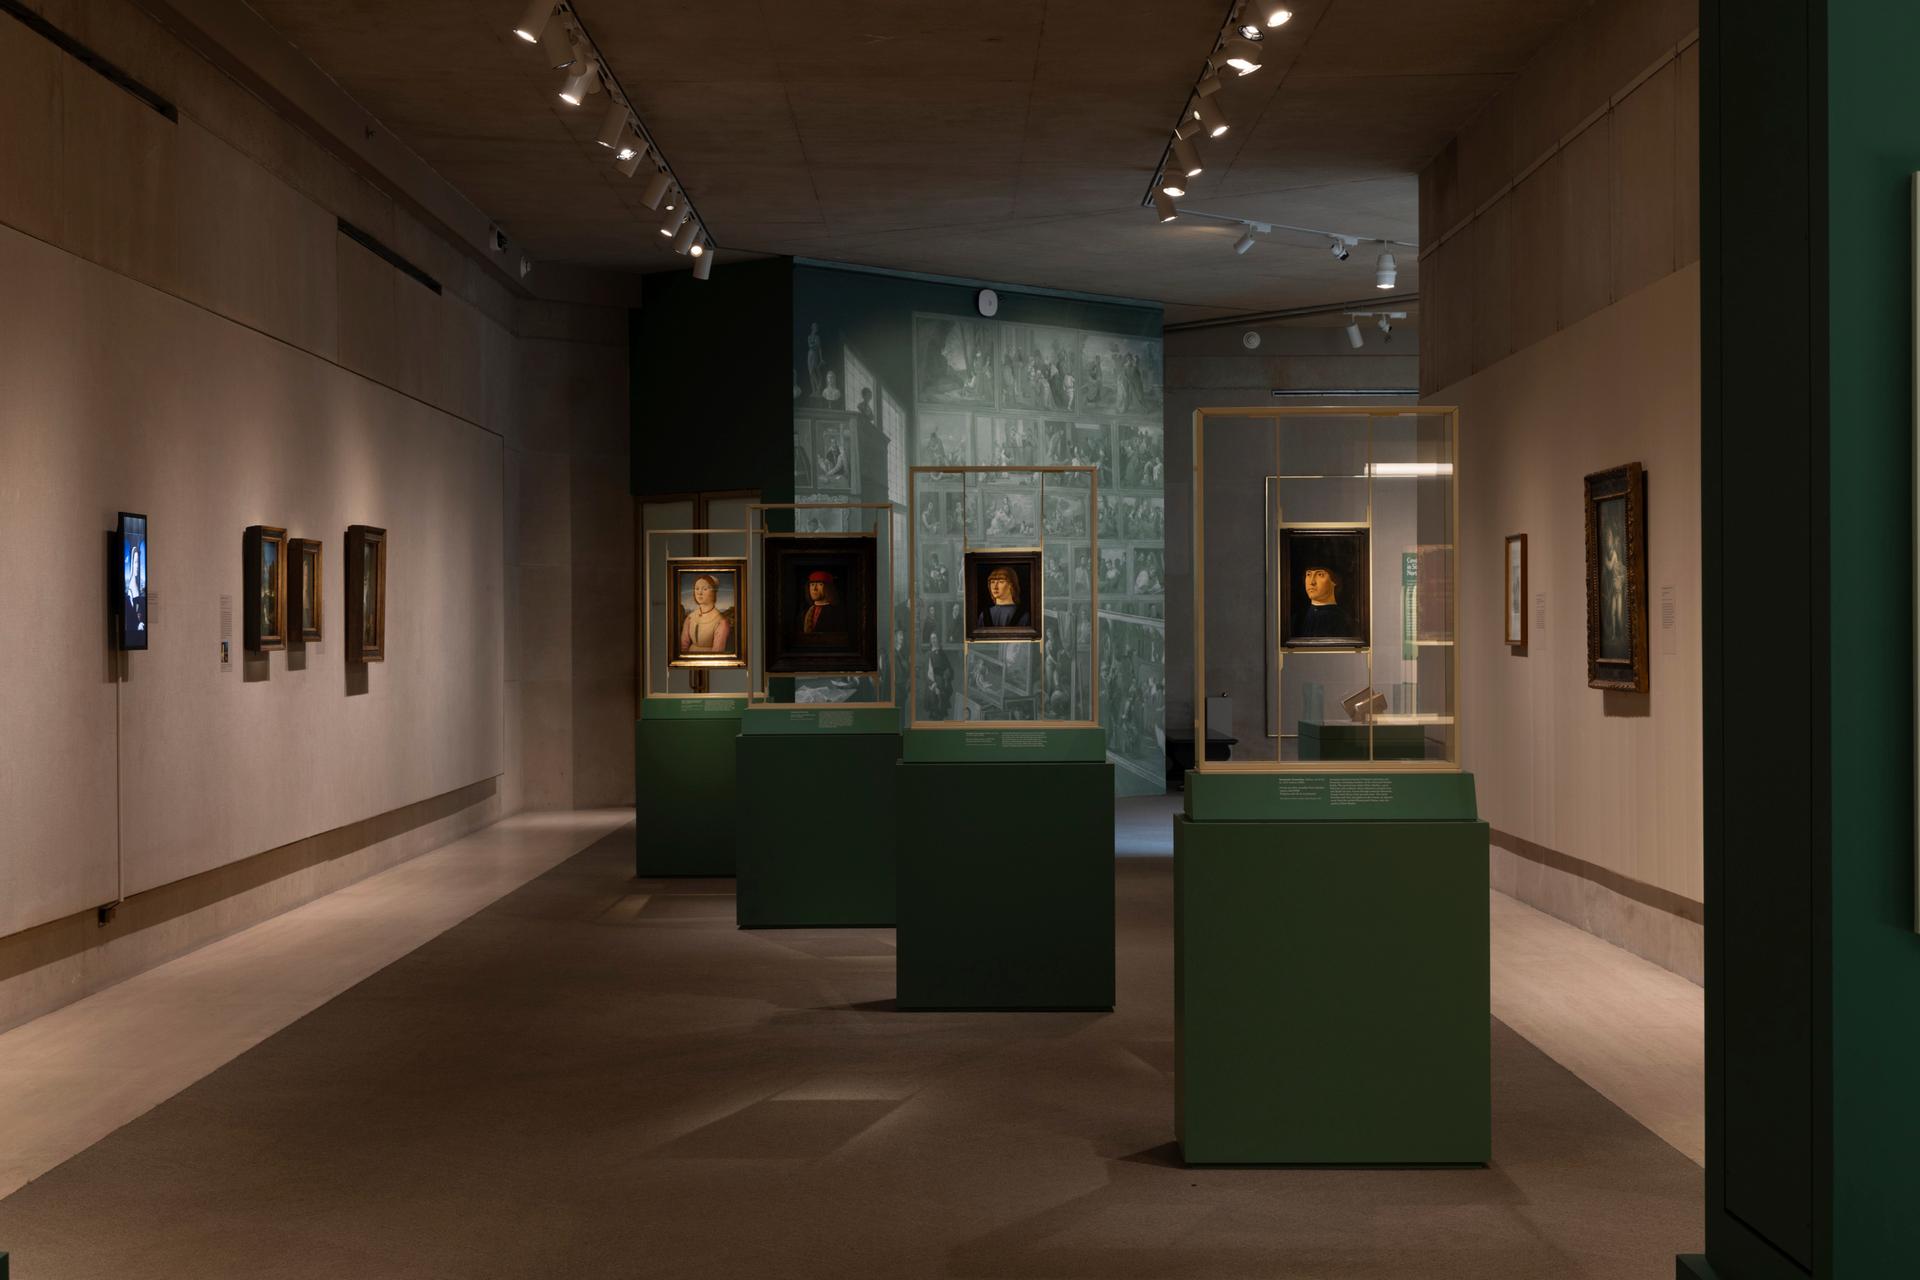 Installation view of Hidden Faces: Covered Portraits of the Renaissance at The Metropolitan Museum of Art.